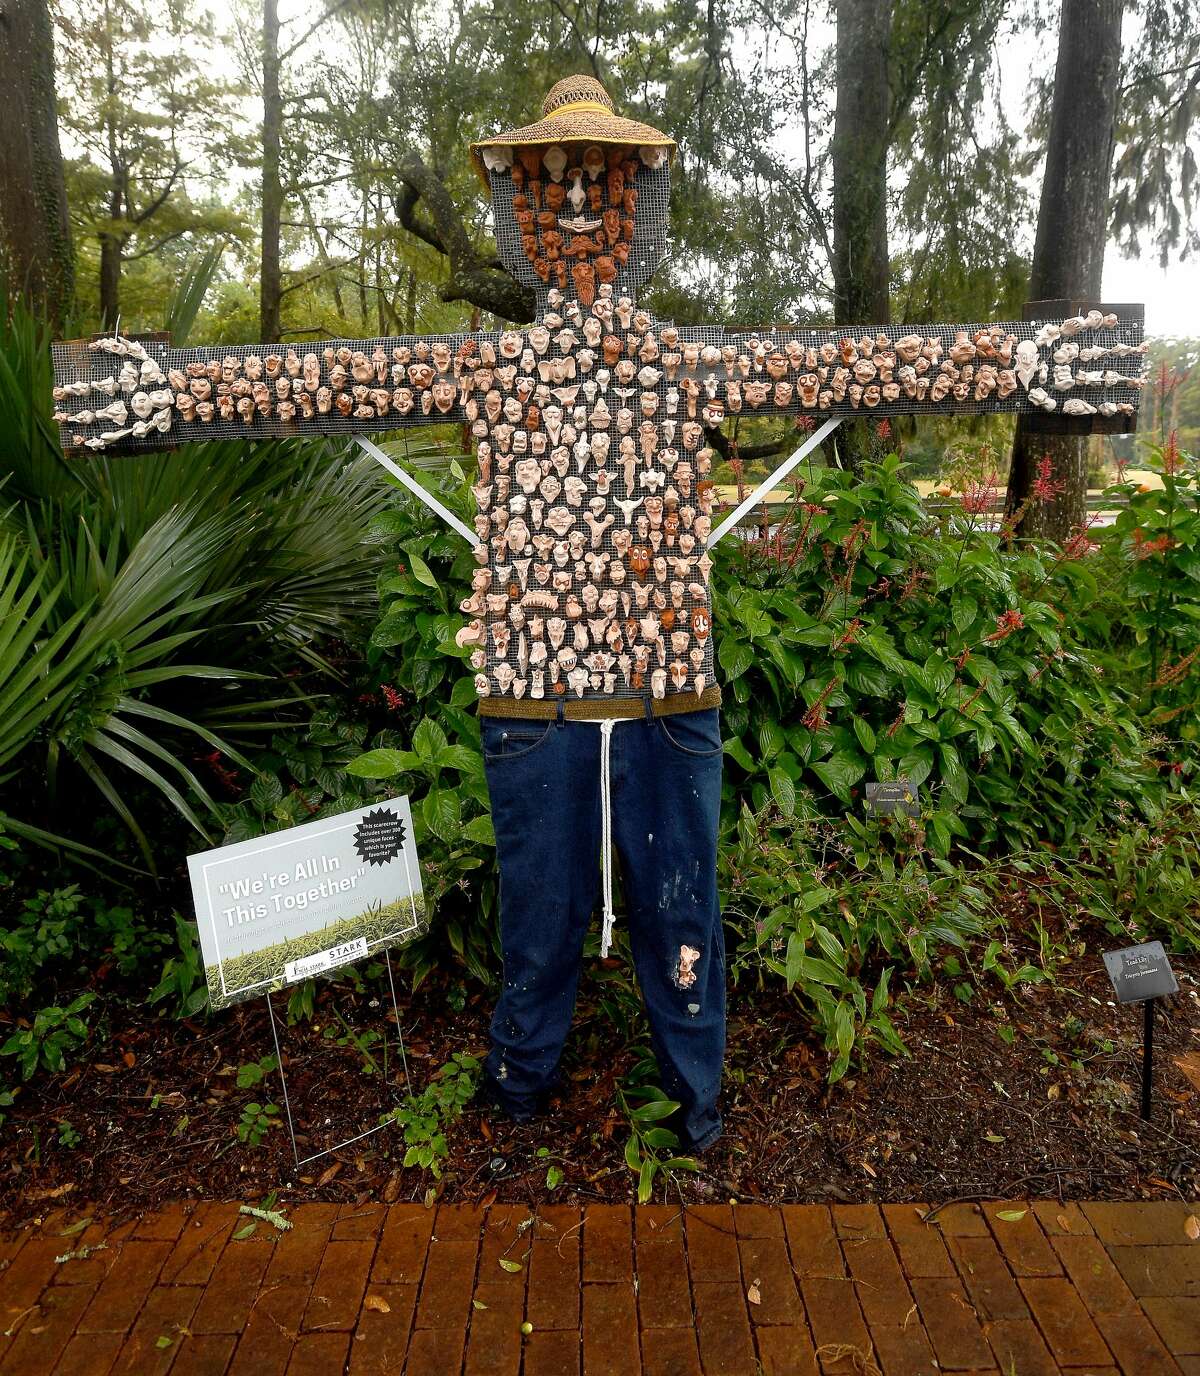 Creativity is on display at this year's Scarecrow Festival at Shangri La Botanical Gardens in Orange. Photo made Monday, October 11, 2021 Kim Brent/The Enterprise